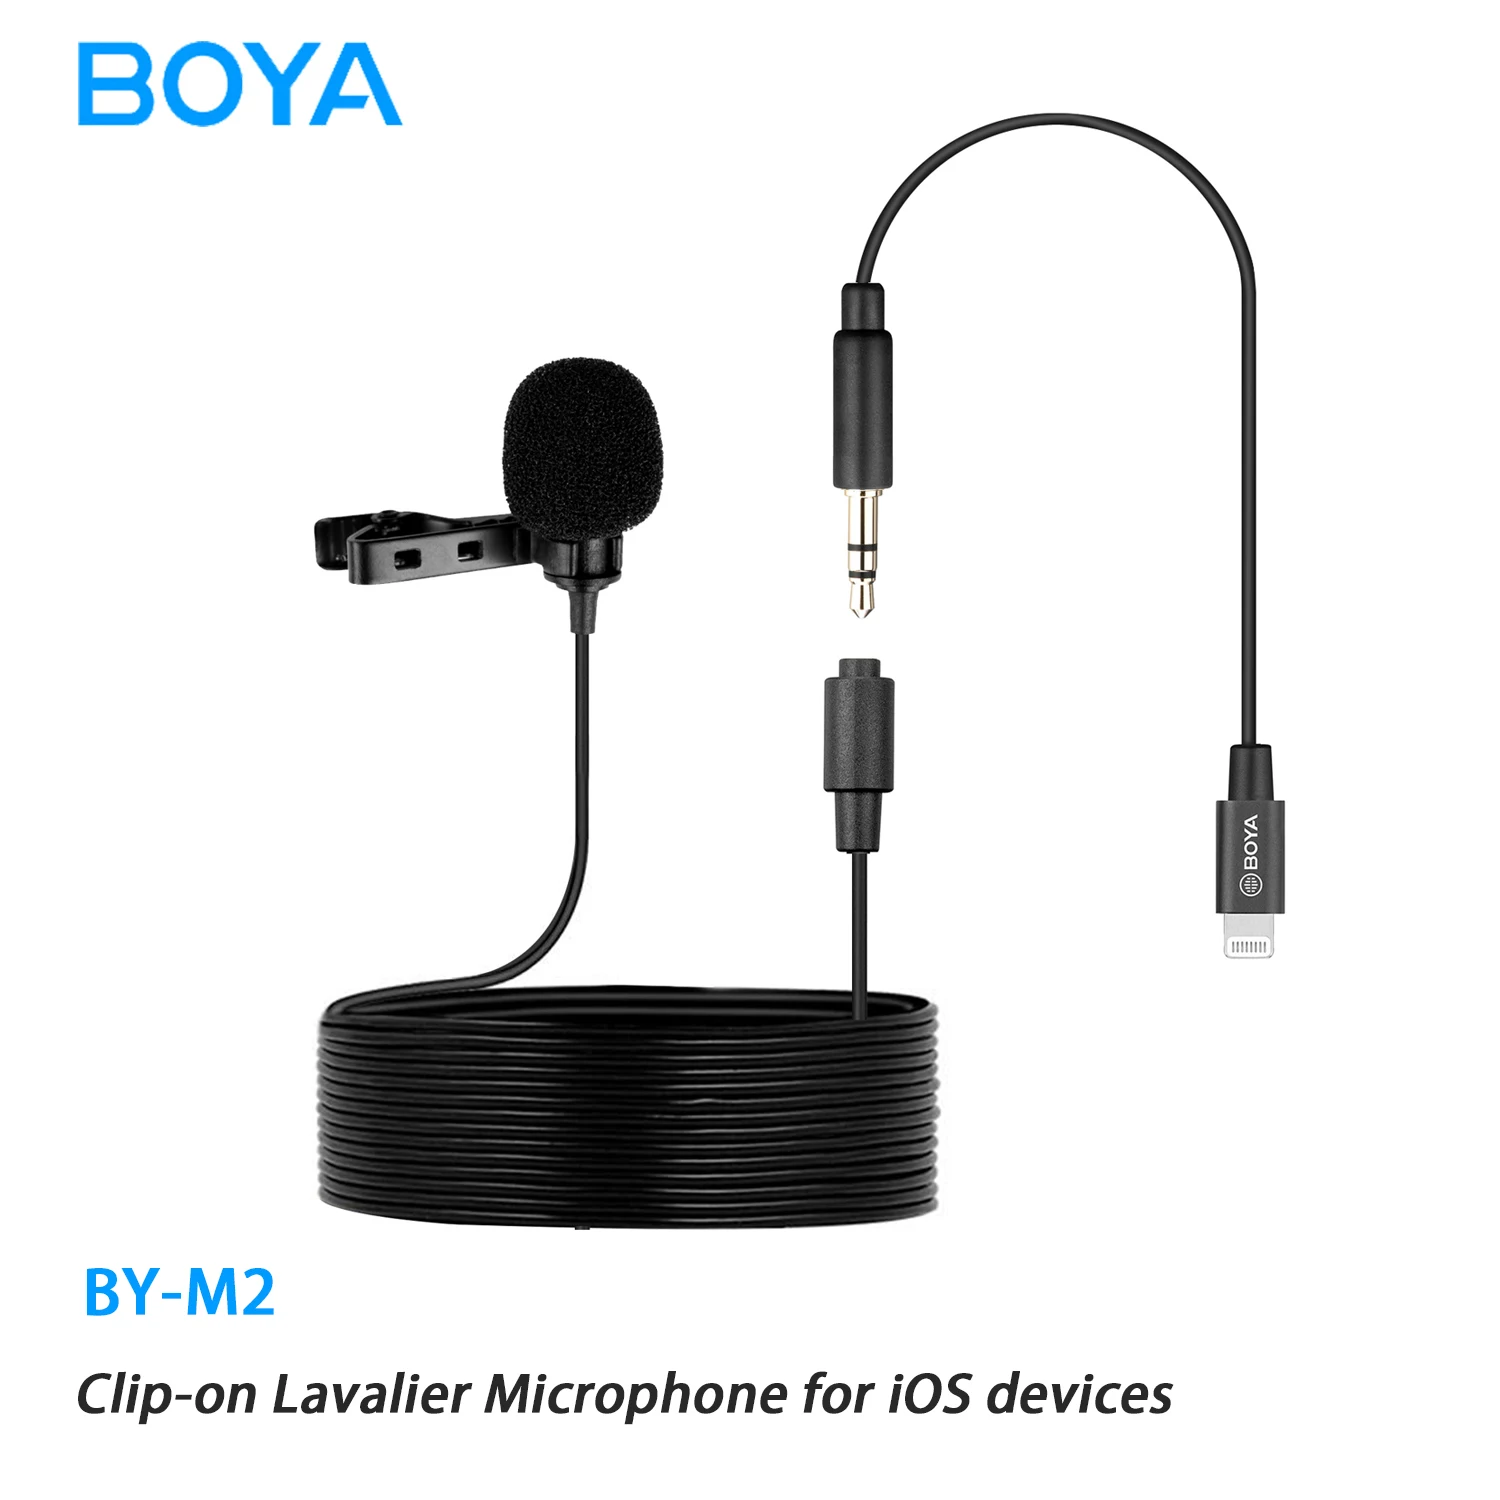 

BOYA BY-M2 Professional Lavalier Clip-on Lapel Microphone for iPad iPhone iPod Live Sreaming Blogger Youtube Recording 6m Cable